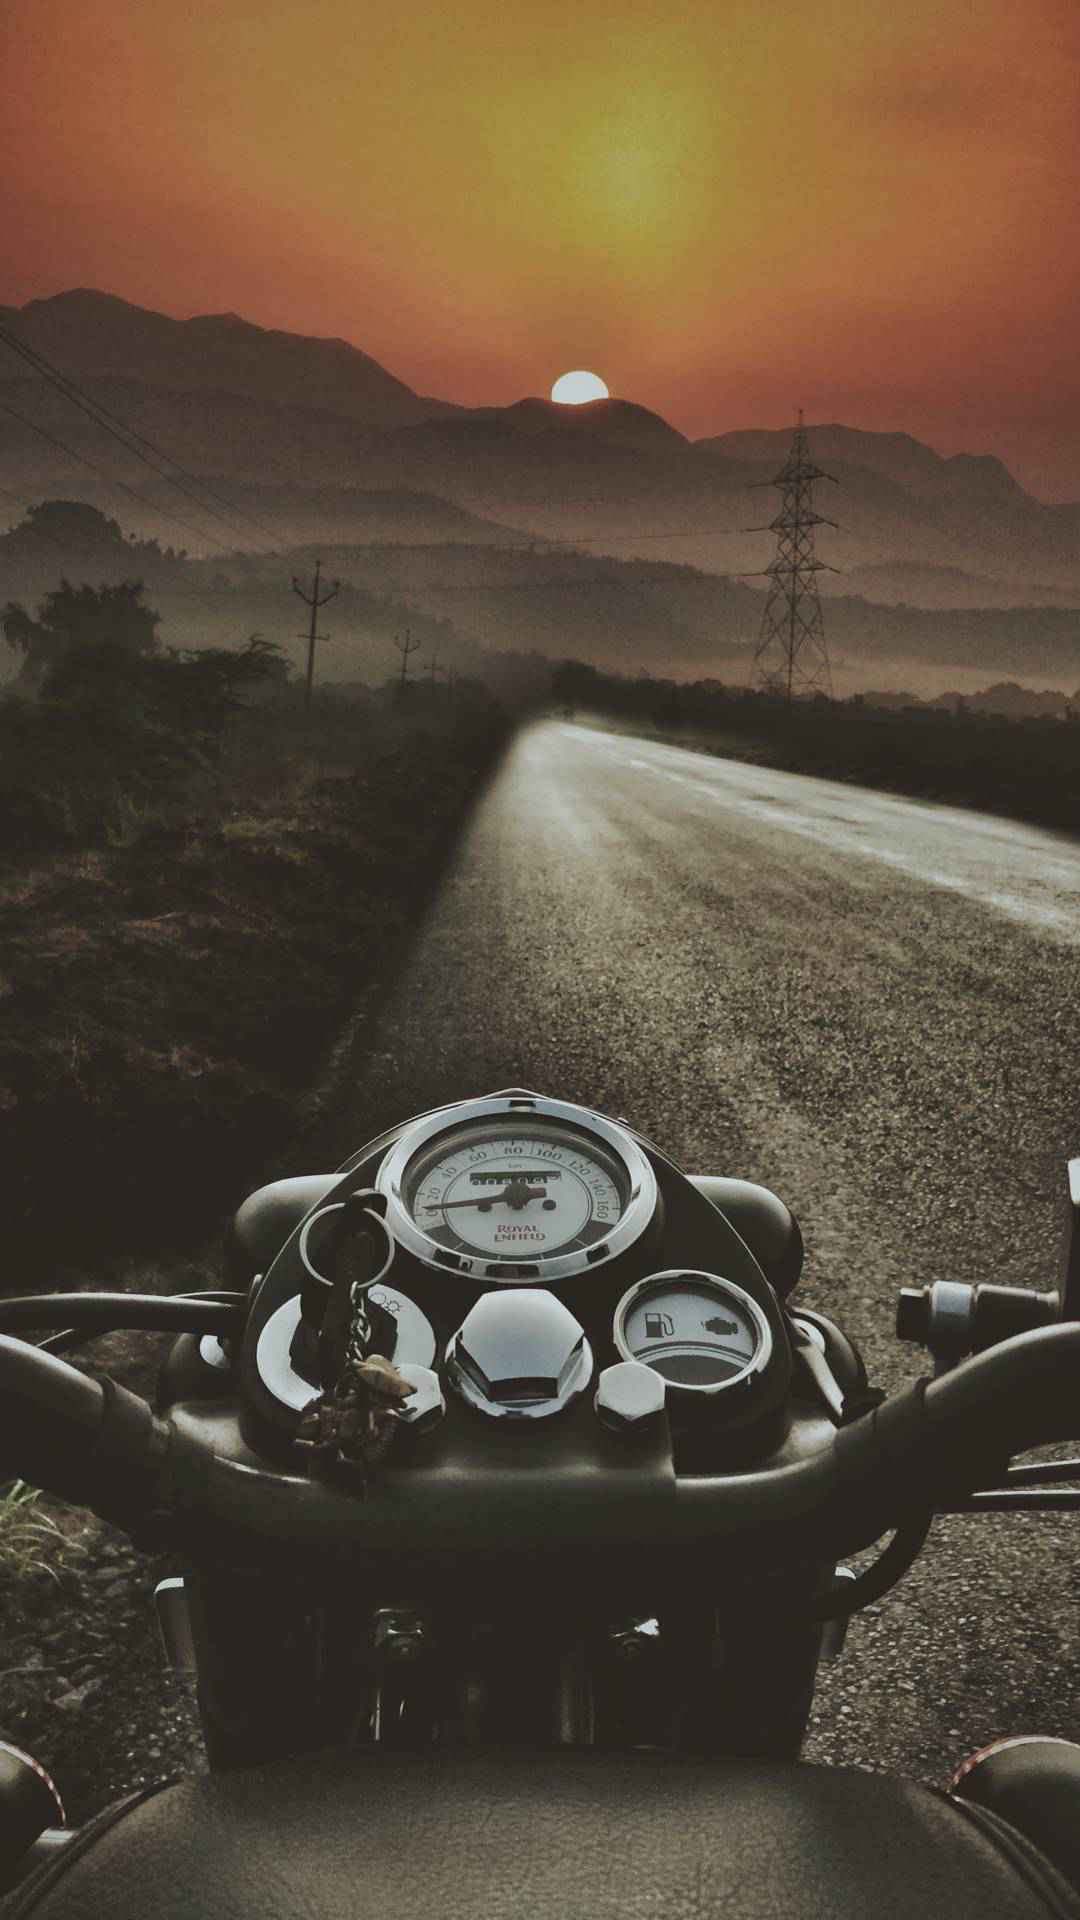 Royal Enfield IPhone Wallpaper - IPhone Wallpapers : iPhone Wallpapers